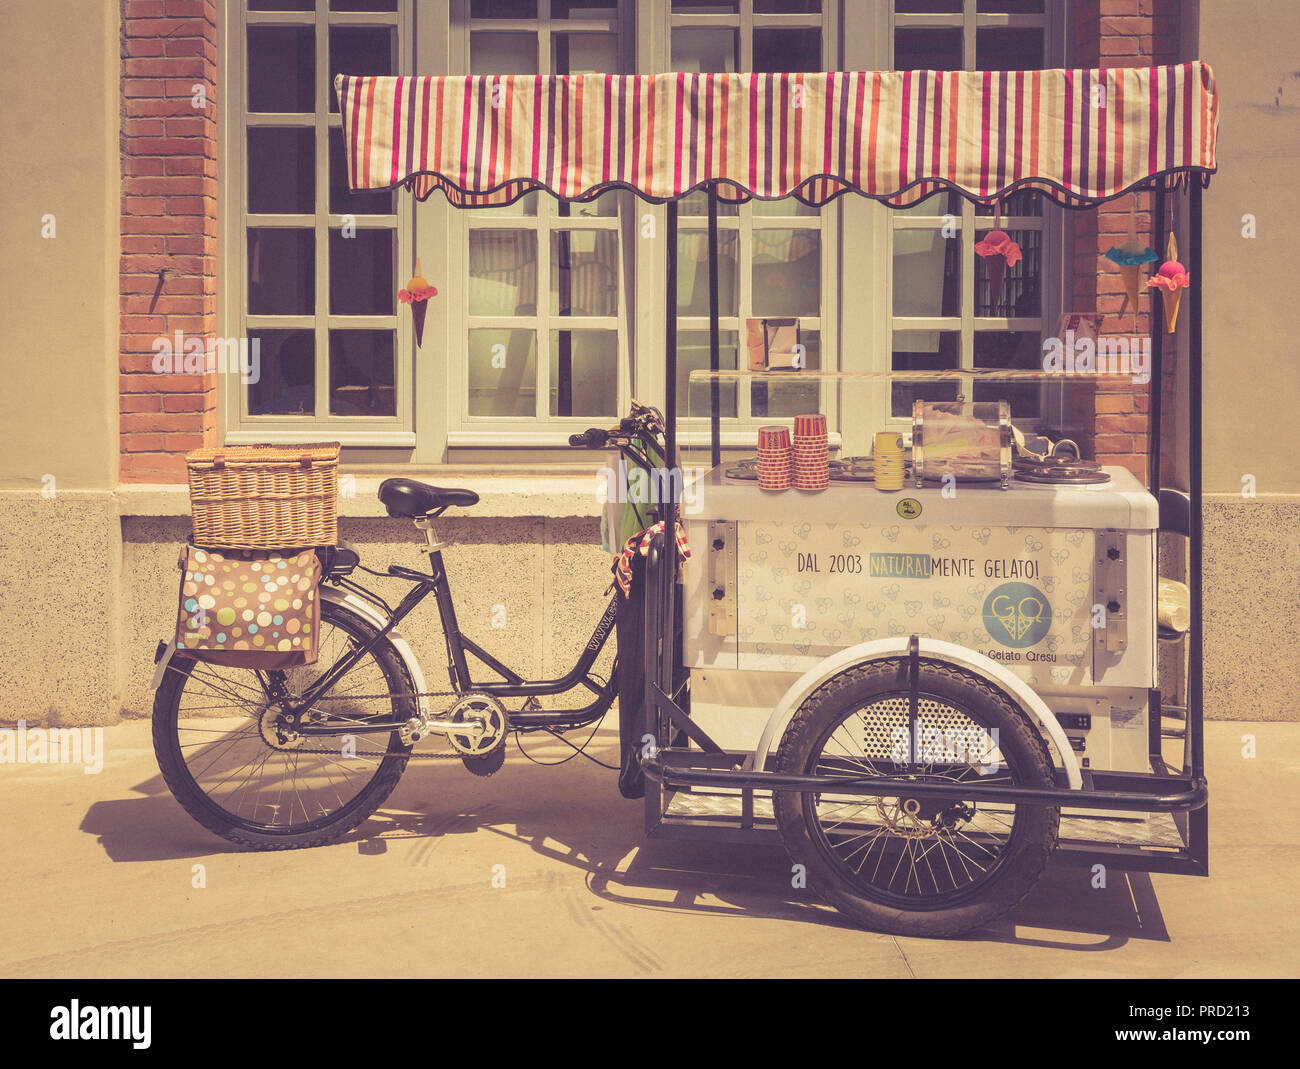 An ice cream cart is built on a bicycle in Cagliari, Sardinia, Italy. Vintage effect Stock Photo